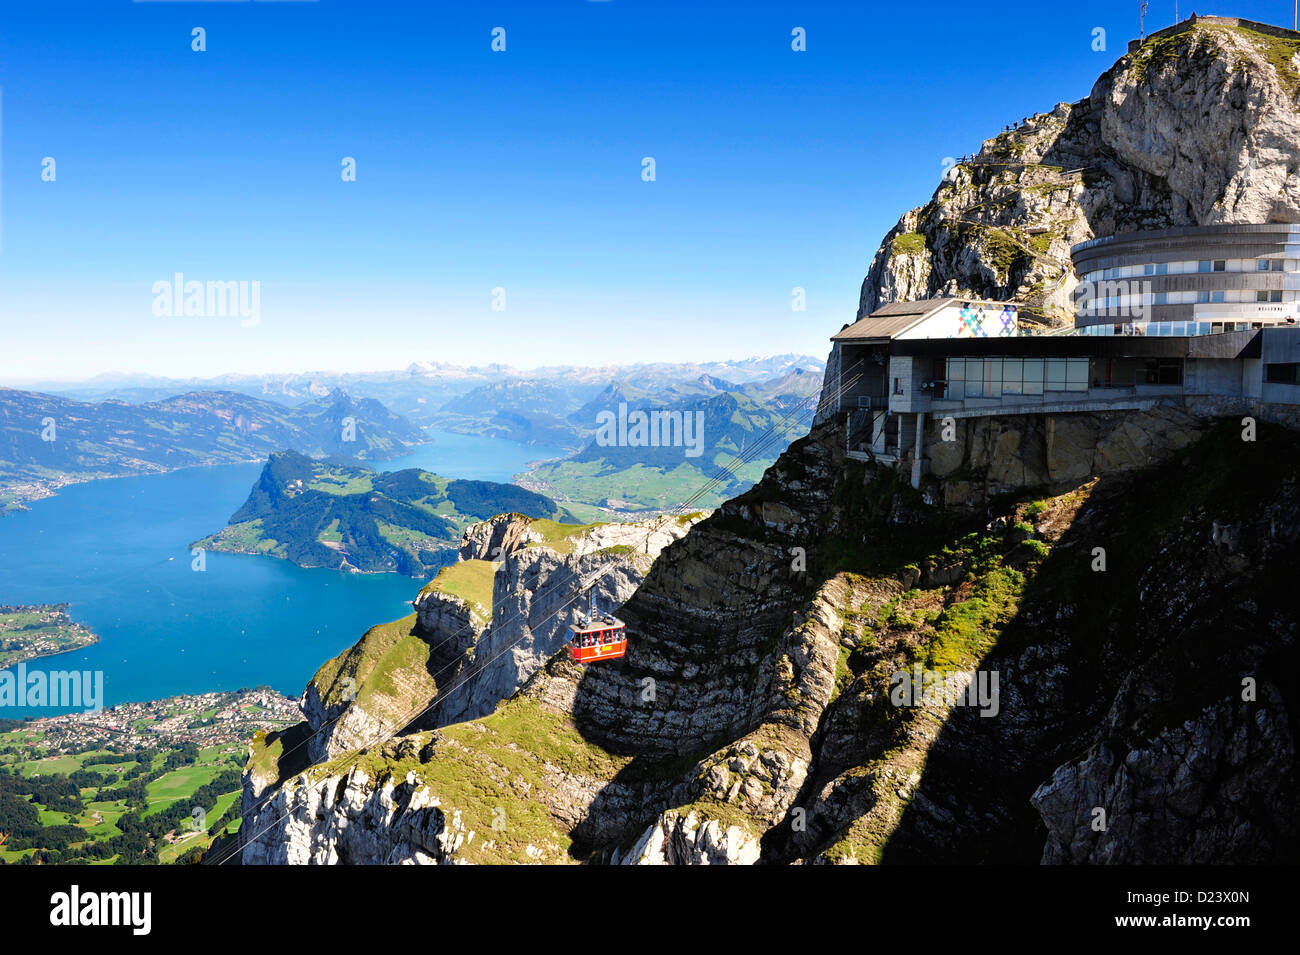 View of panorama gondola descending from the summit of Mount Pilatus, near Lucerne in central Switzerland. Stock Photo